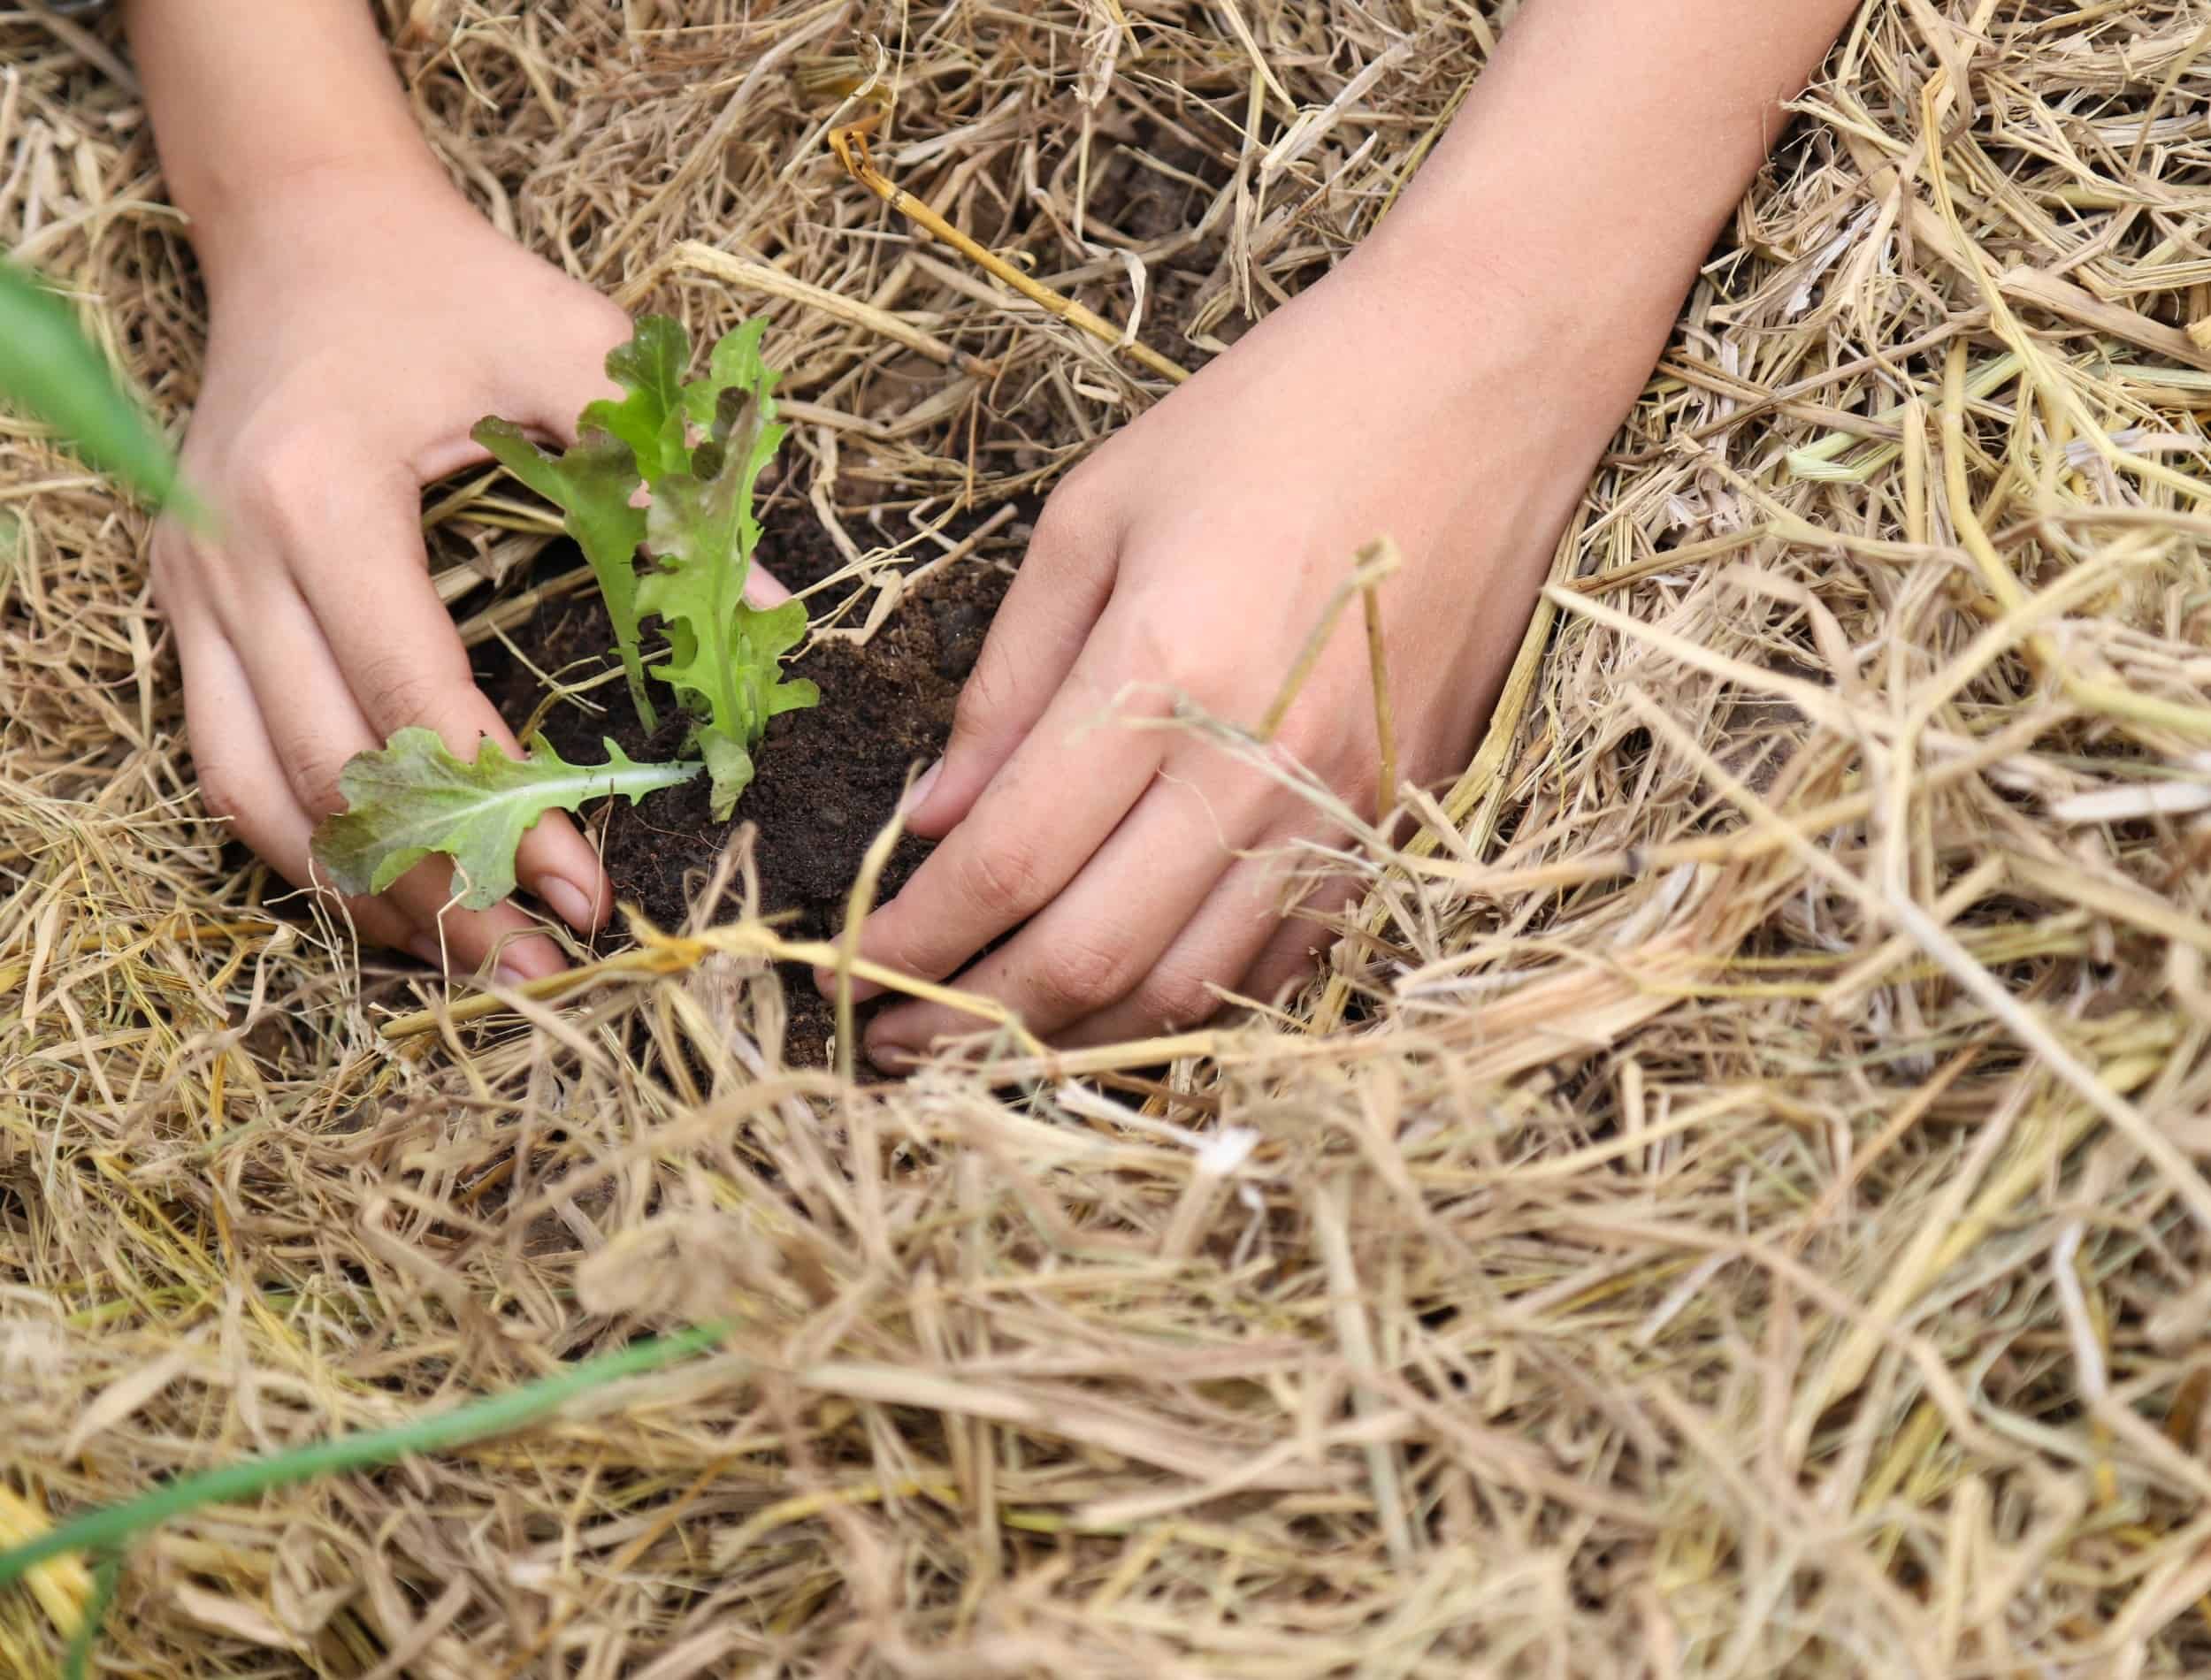 Closeup of growing vegetable on the ground with straw, by girl's hands in the garden as family activity. Show natural, simple way of life, self-reliance and green development direction.